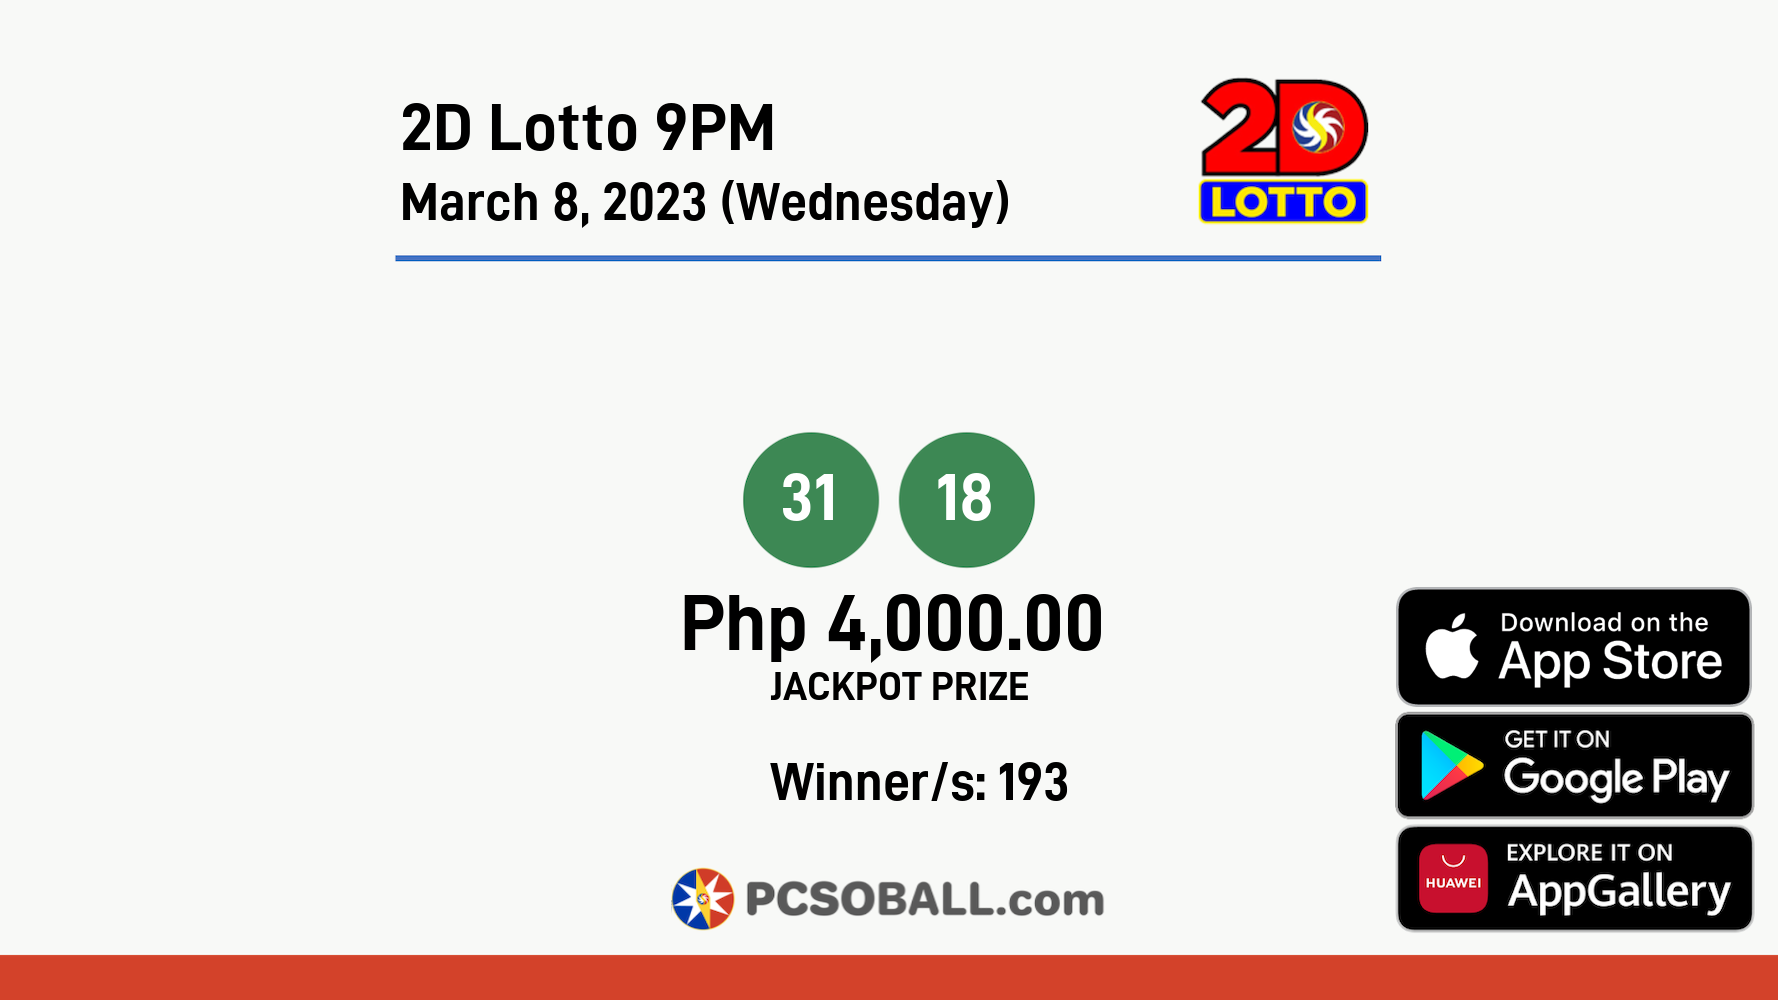 2D Lotto 9PM March 8, 2023 (Wednesday) Result